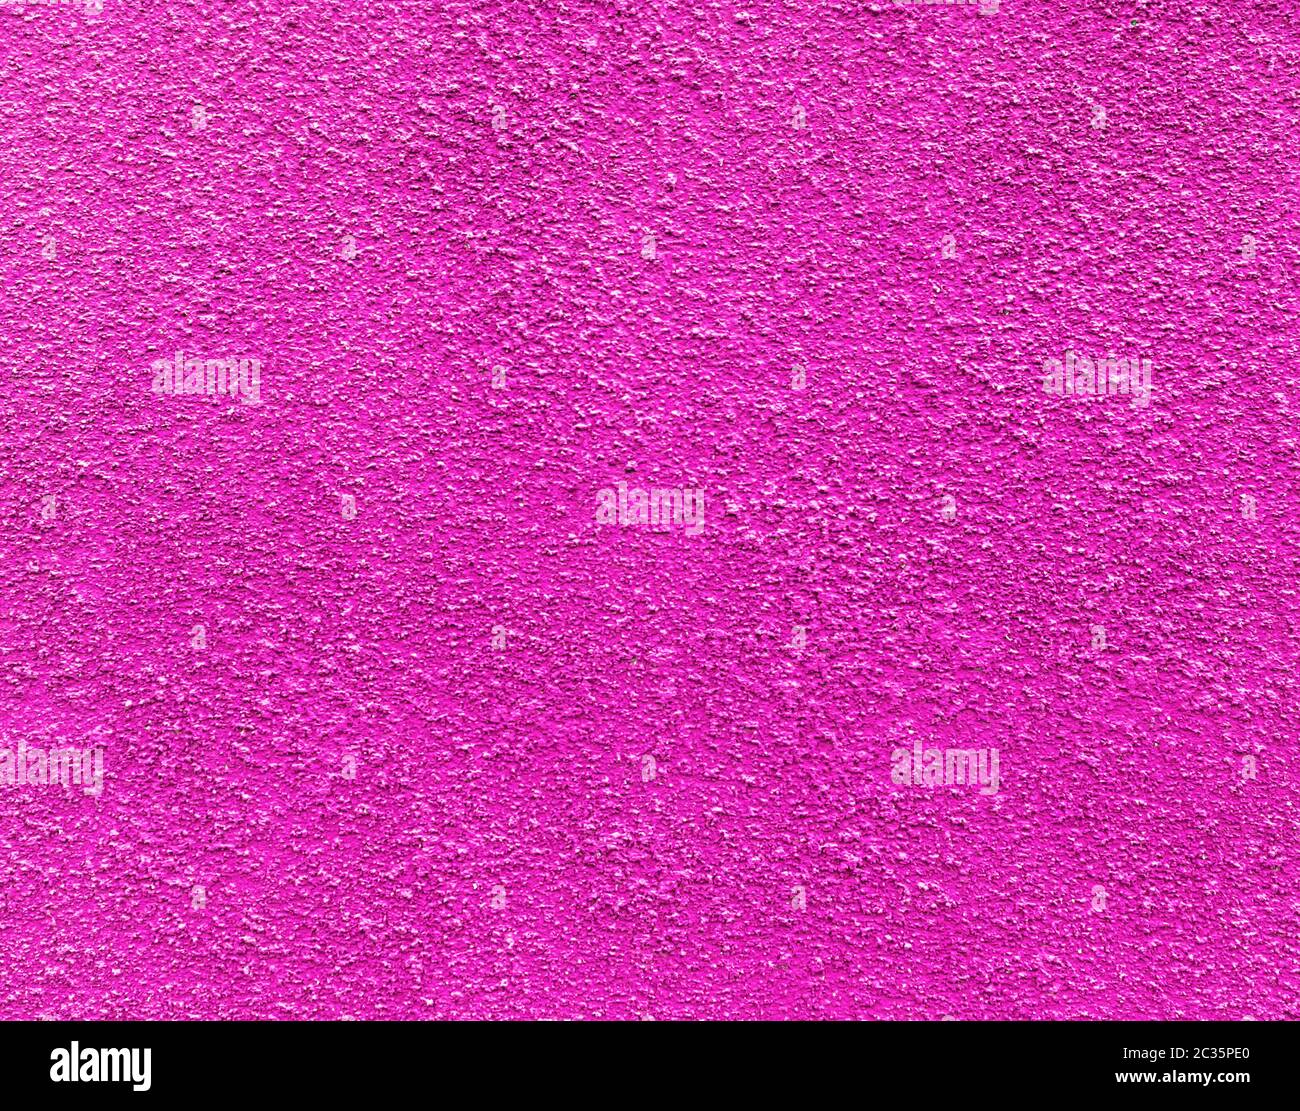 Pink wall texture Stock Photo